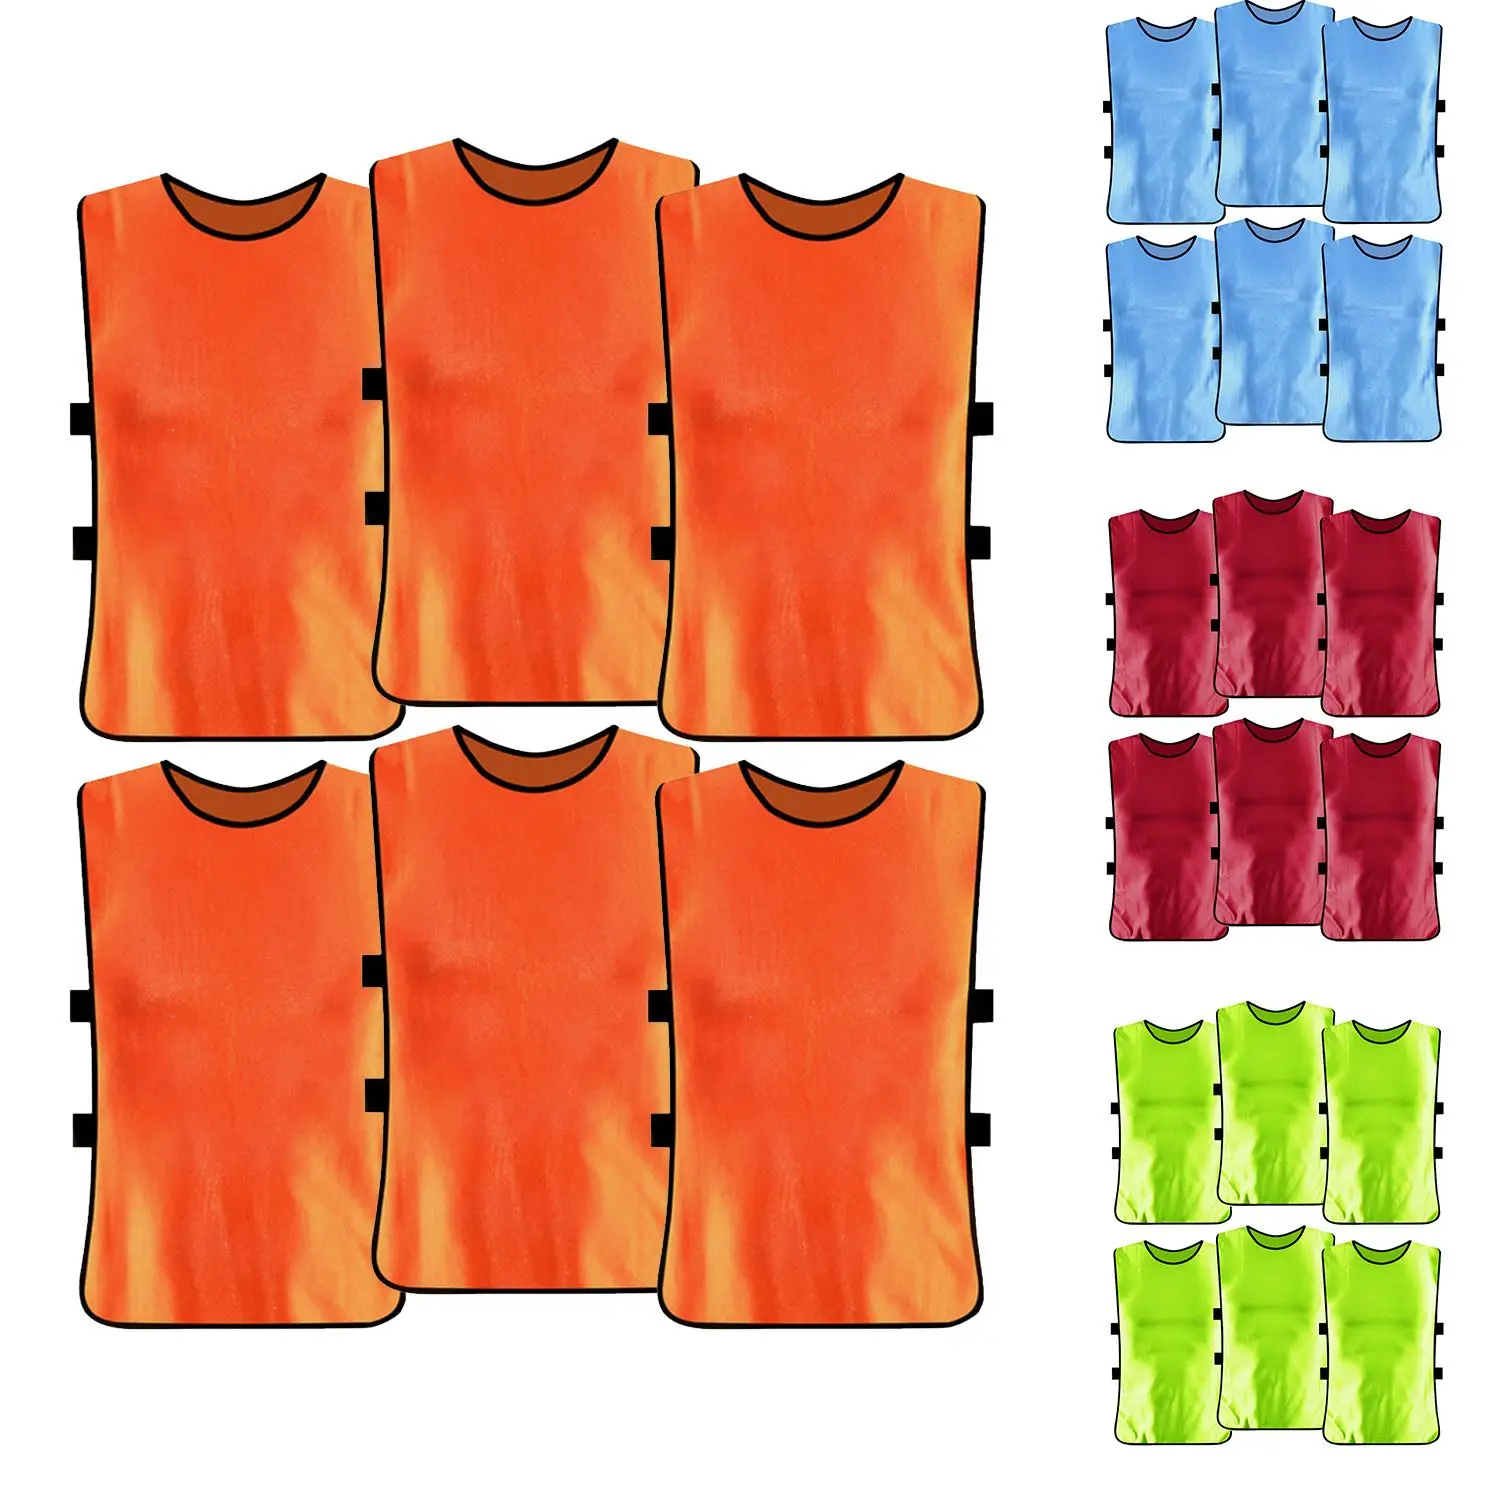 6 PCS Adults Kids Soccer Pinnies Quick Drying Football Jerseys Vest Scrimmage Practice Sports Vest Breathable Team Training Bibs